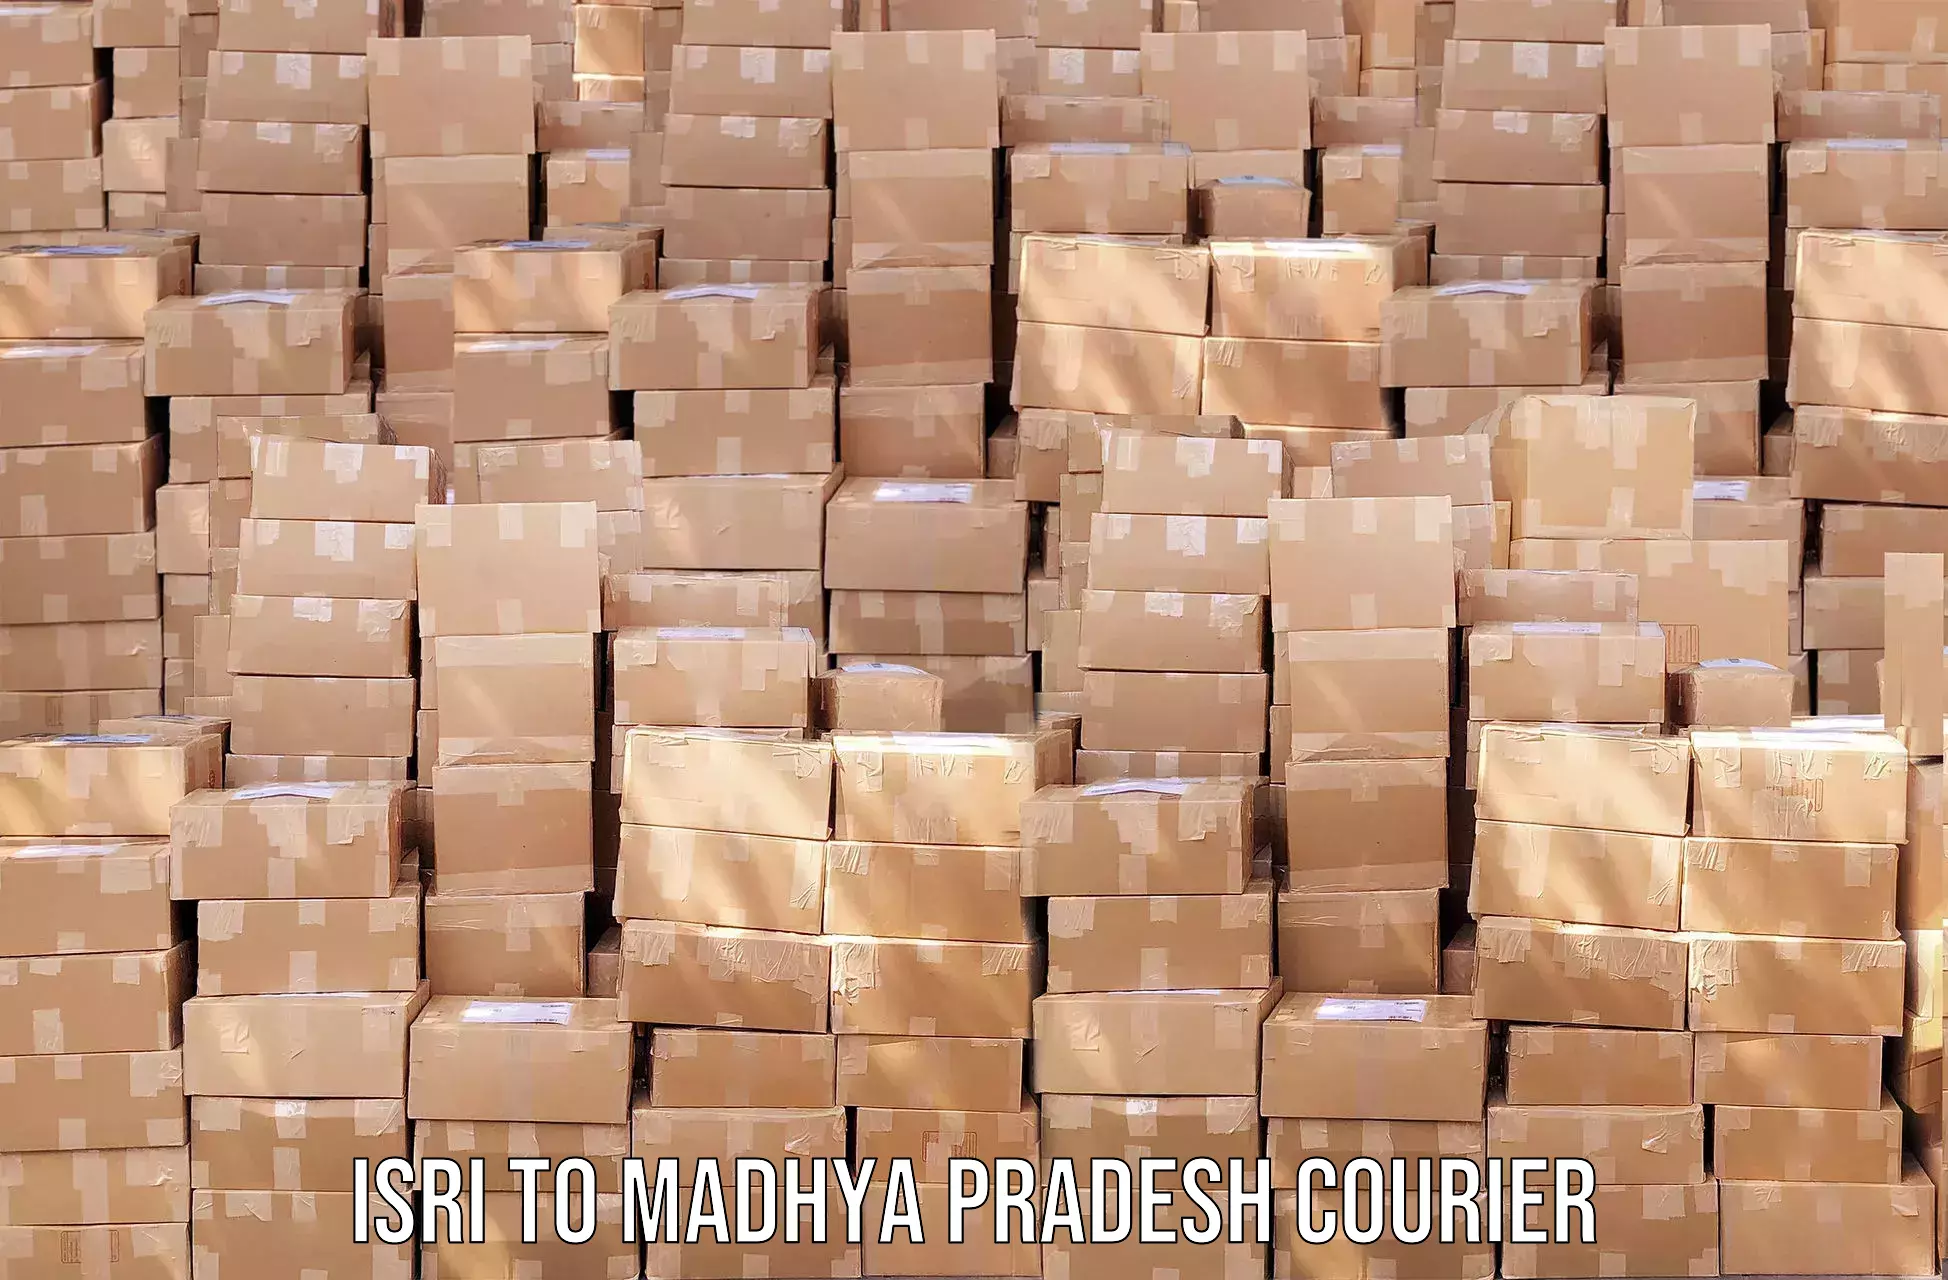 Parcel service for businesses in Isri to Madhya Pradesh